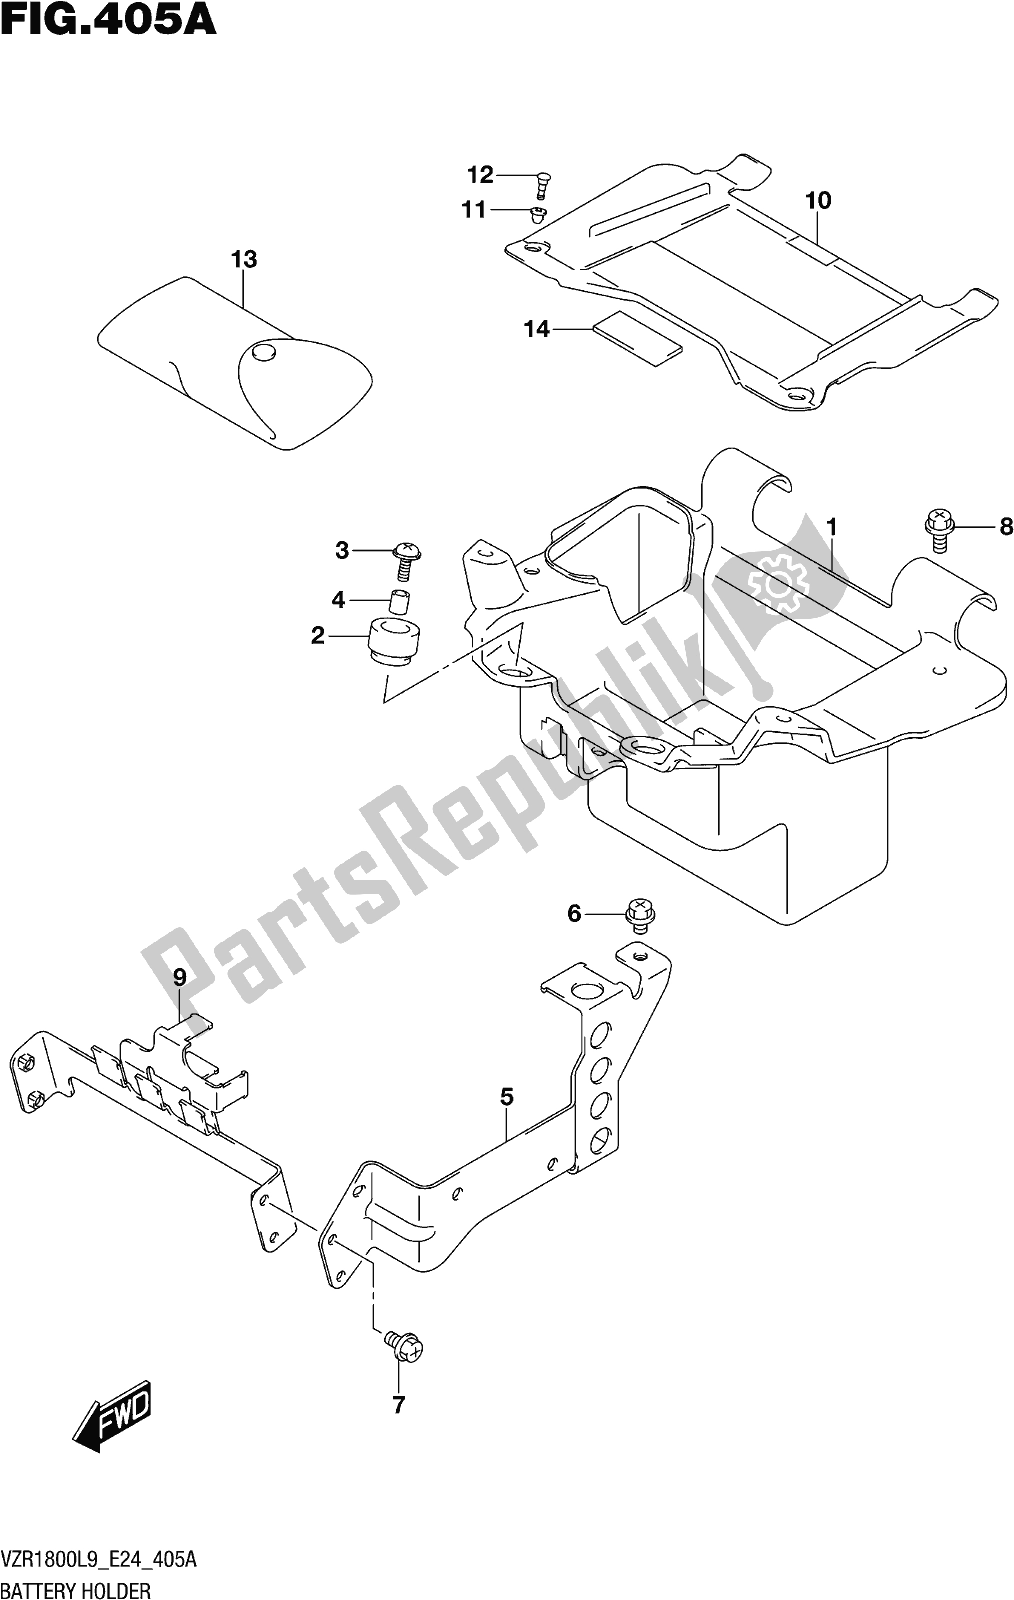 All parts for the Fig. 405a Battery Holder of the Suzuki VZR 1800 BZ 2019